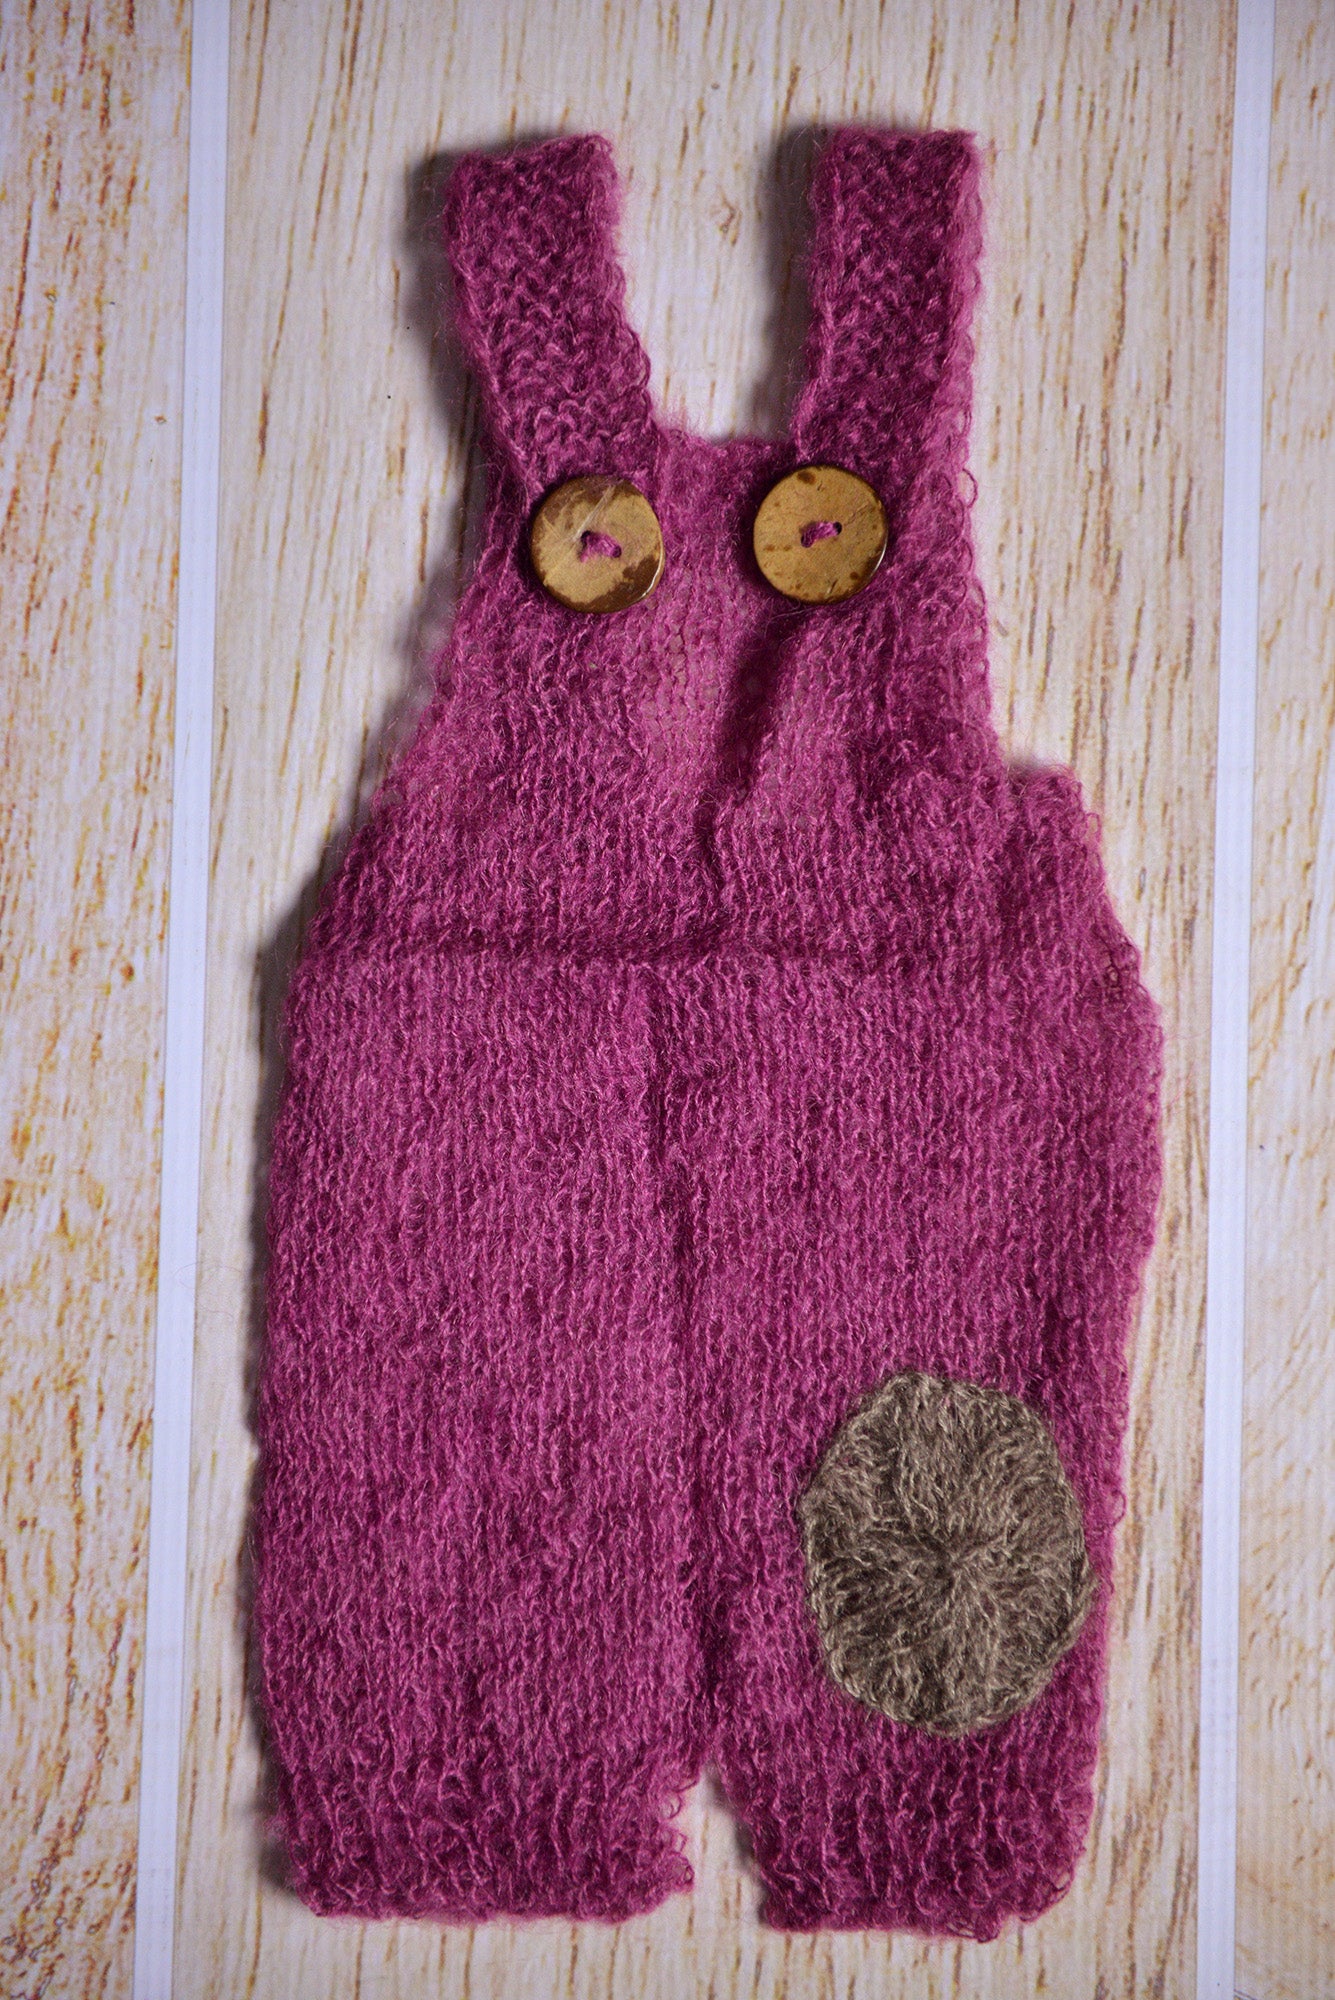 Mohair Overall with Patch and Buttons - Mauve-Newborn Photography Props